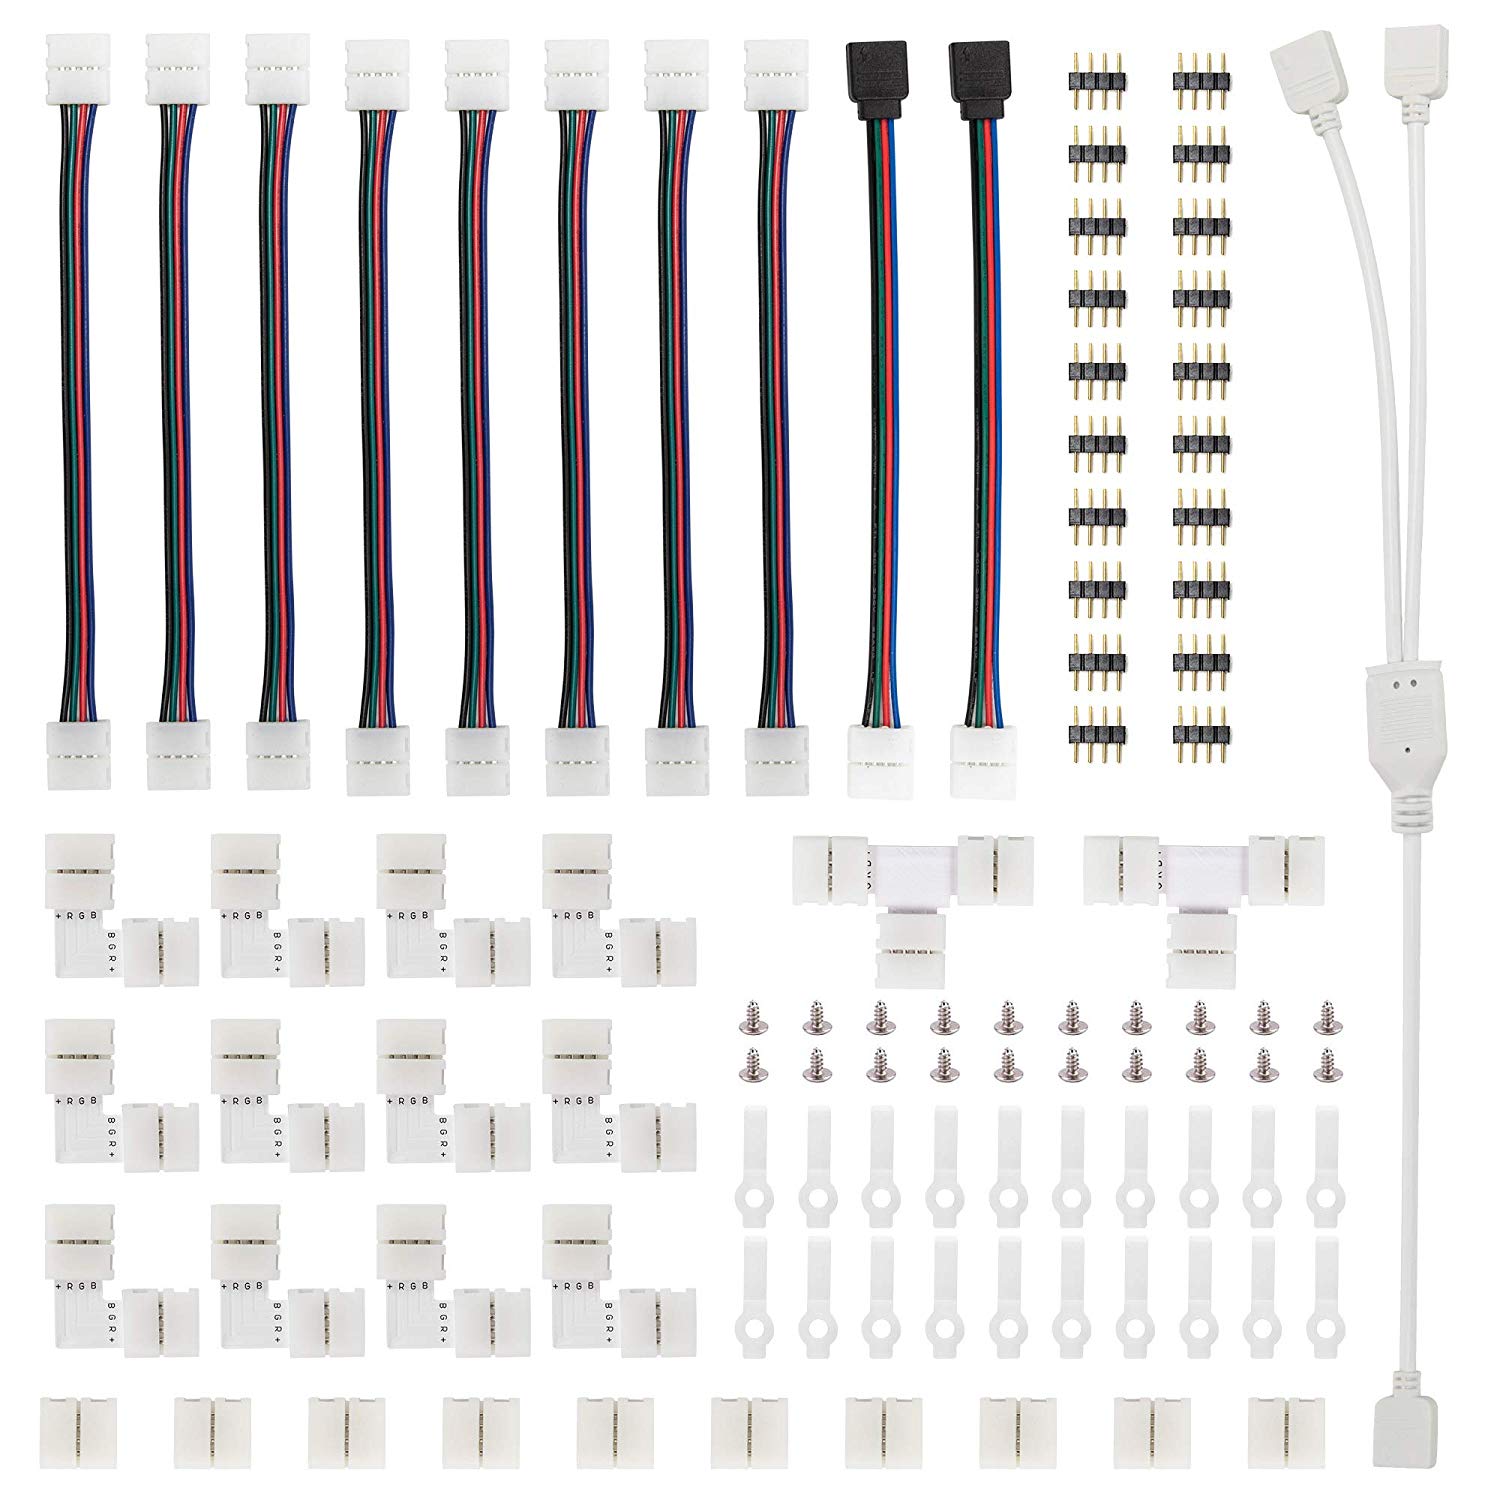 RGB-LED-Strip-Connector-Kit-for-10mm-4Pin-5050-Includes-8-Types-of-Solderless-Accessories-Provides-M-1613391